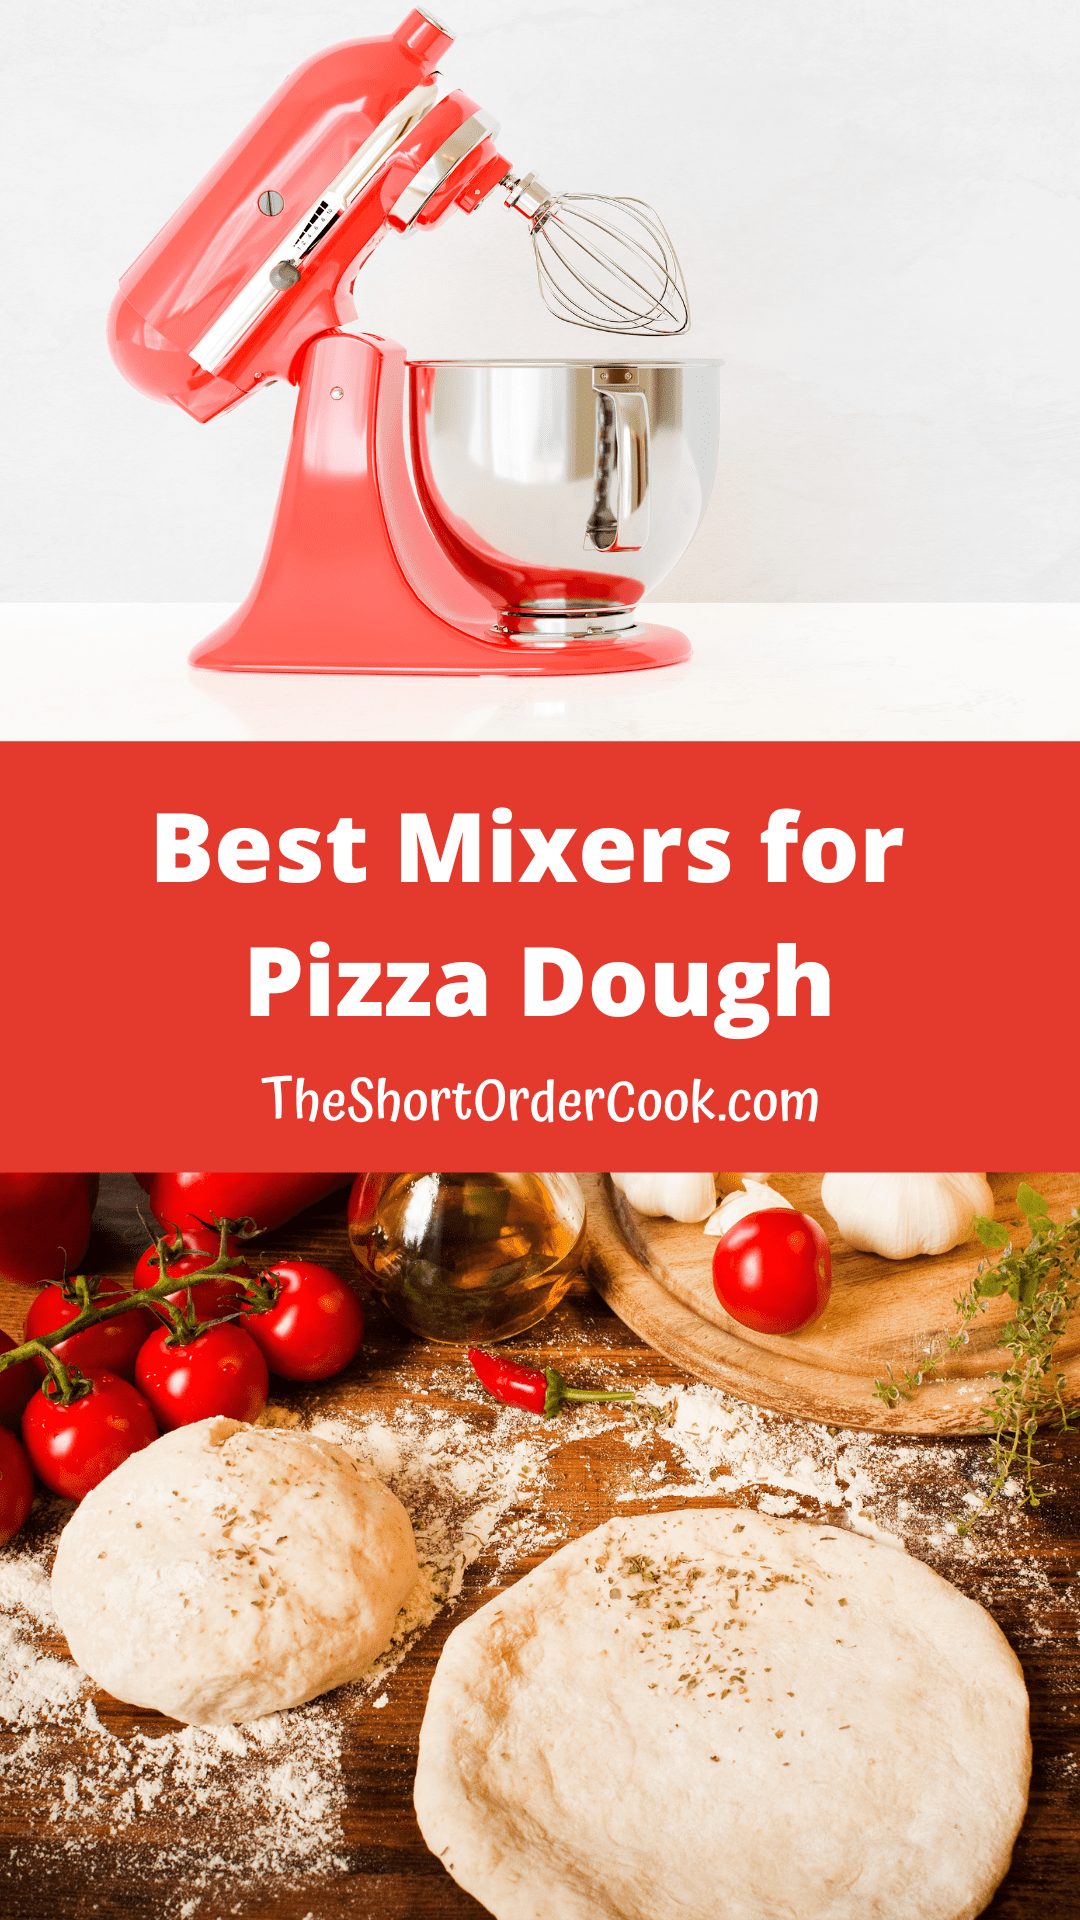 A red stand mixer on the counter and pizza dough rolled out on wooden board.